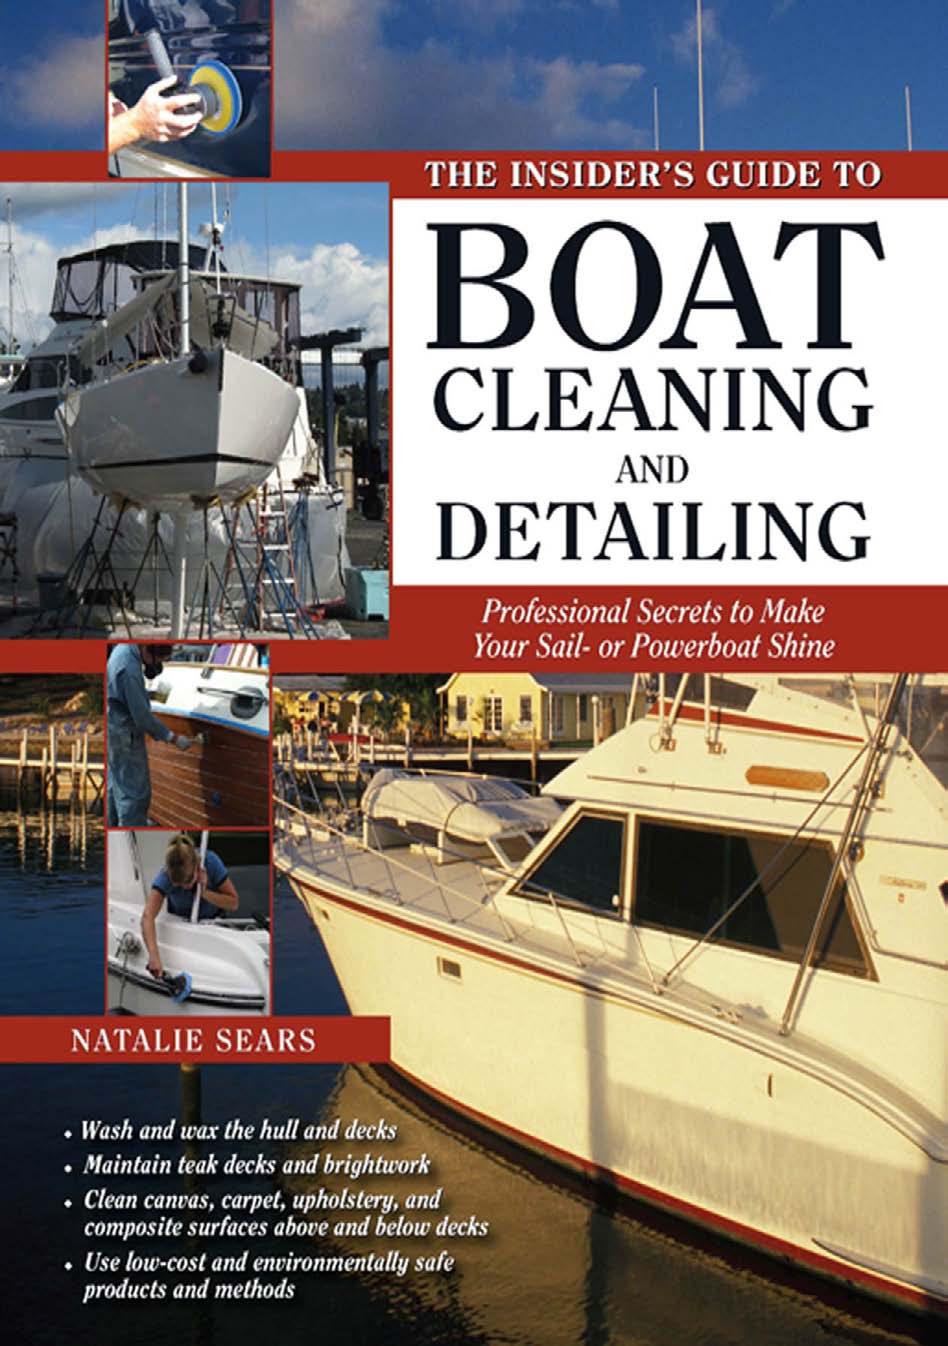 The Insider's Guide to Boat Cleaning and Detailing: Professional Secrets to Make Your Sail-Or Powerboat Beautiful